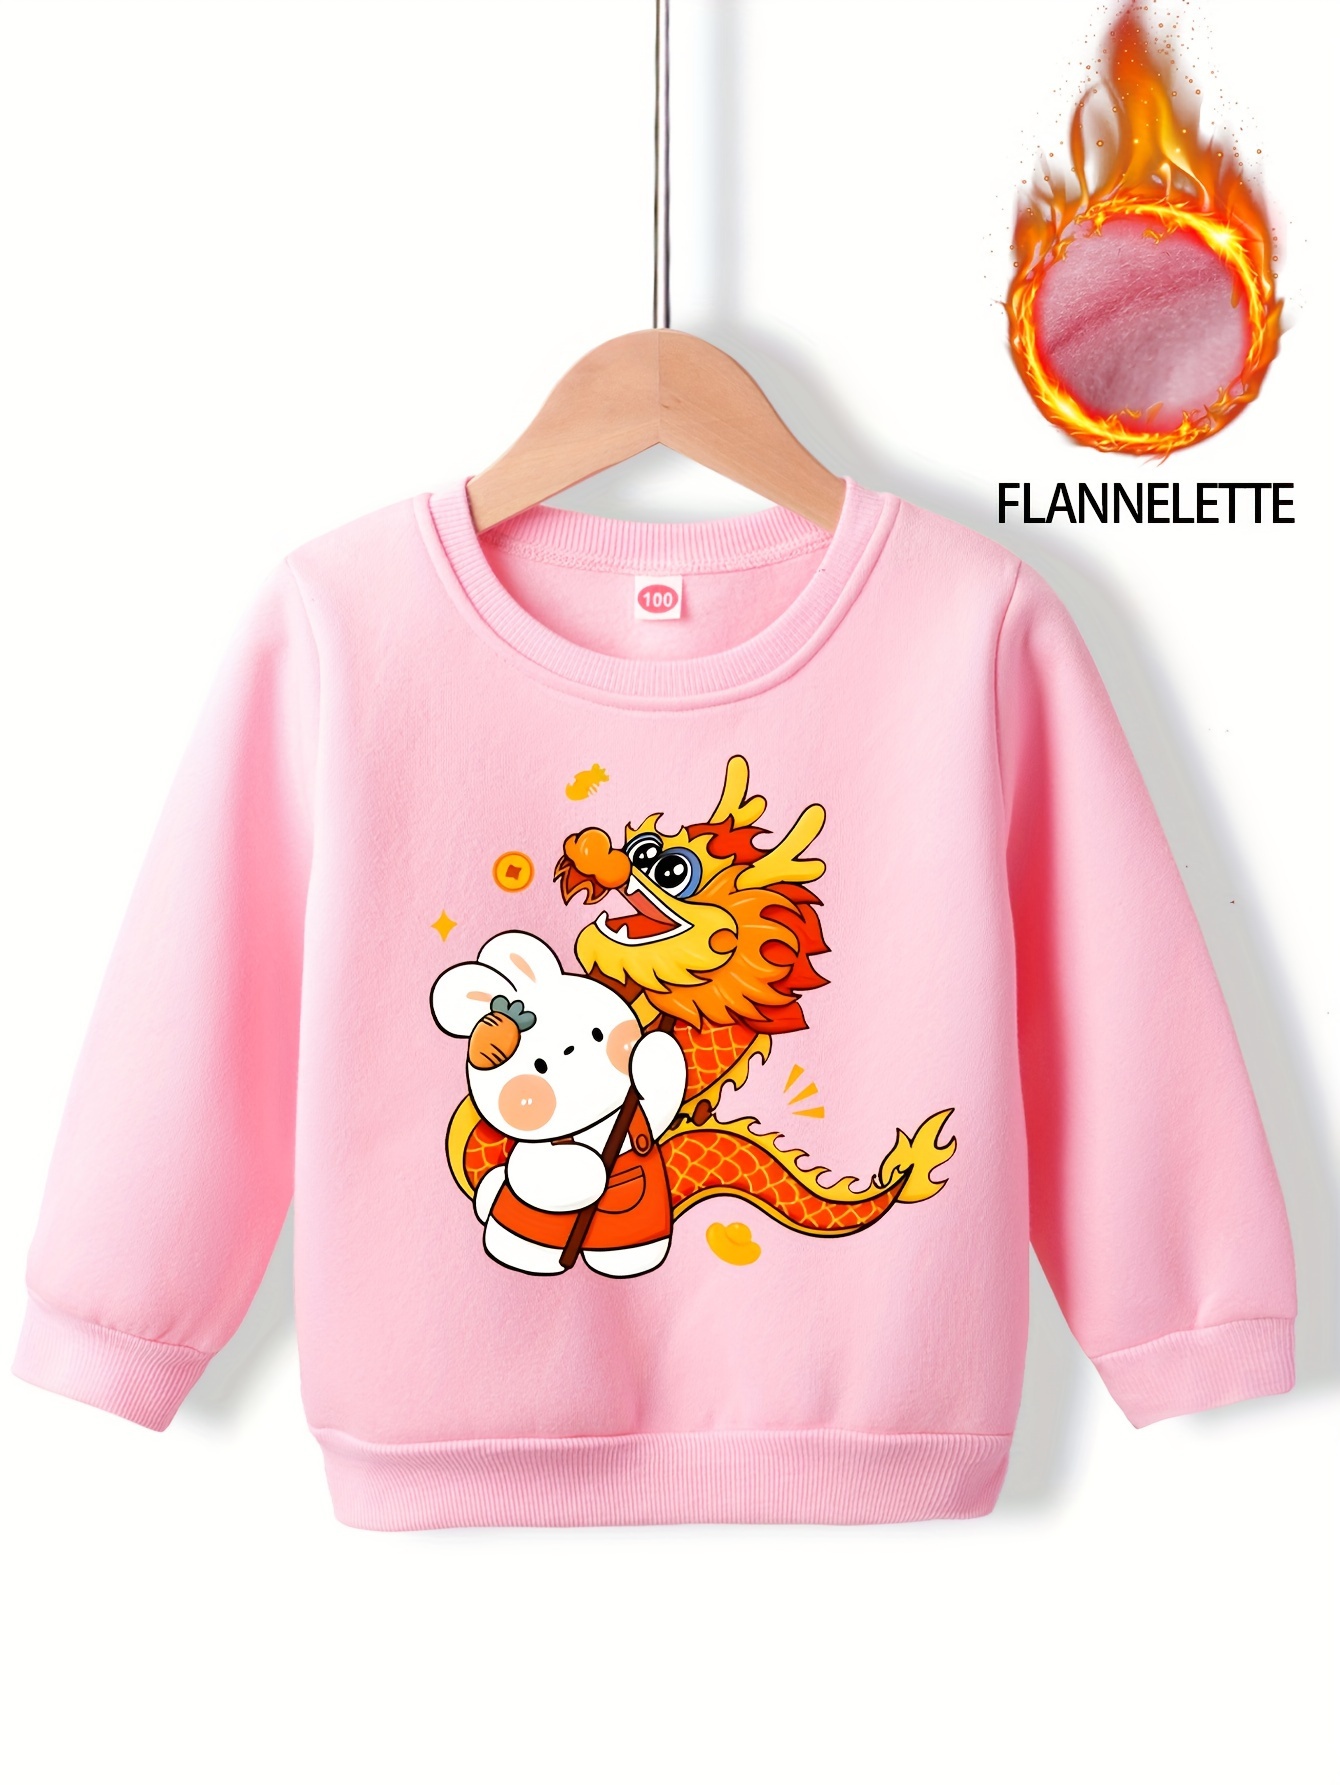 Children's Thermal Dance Clothing